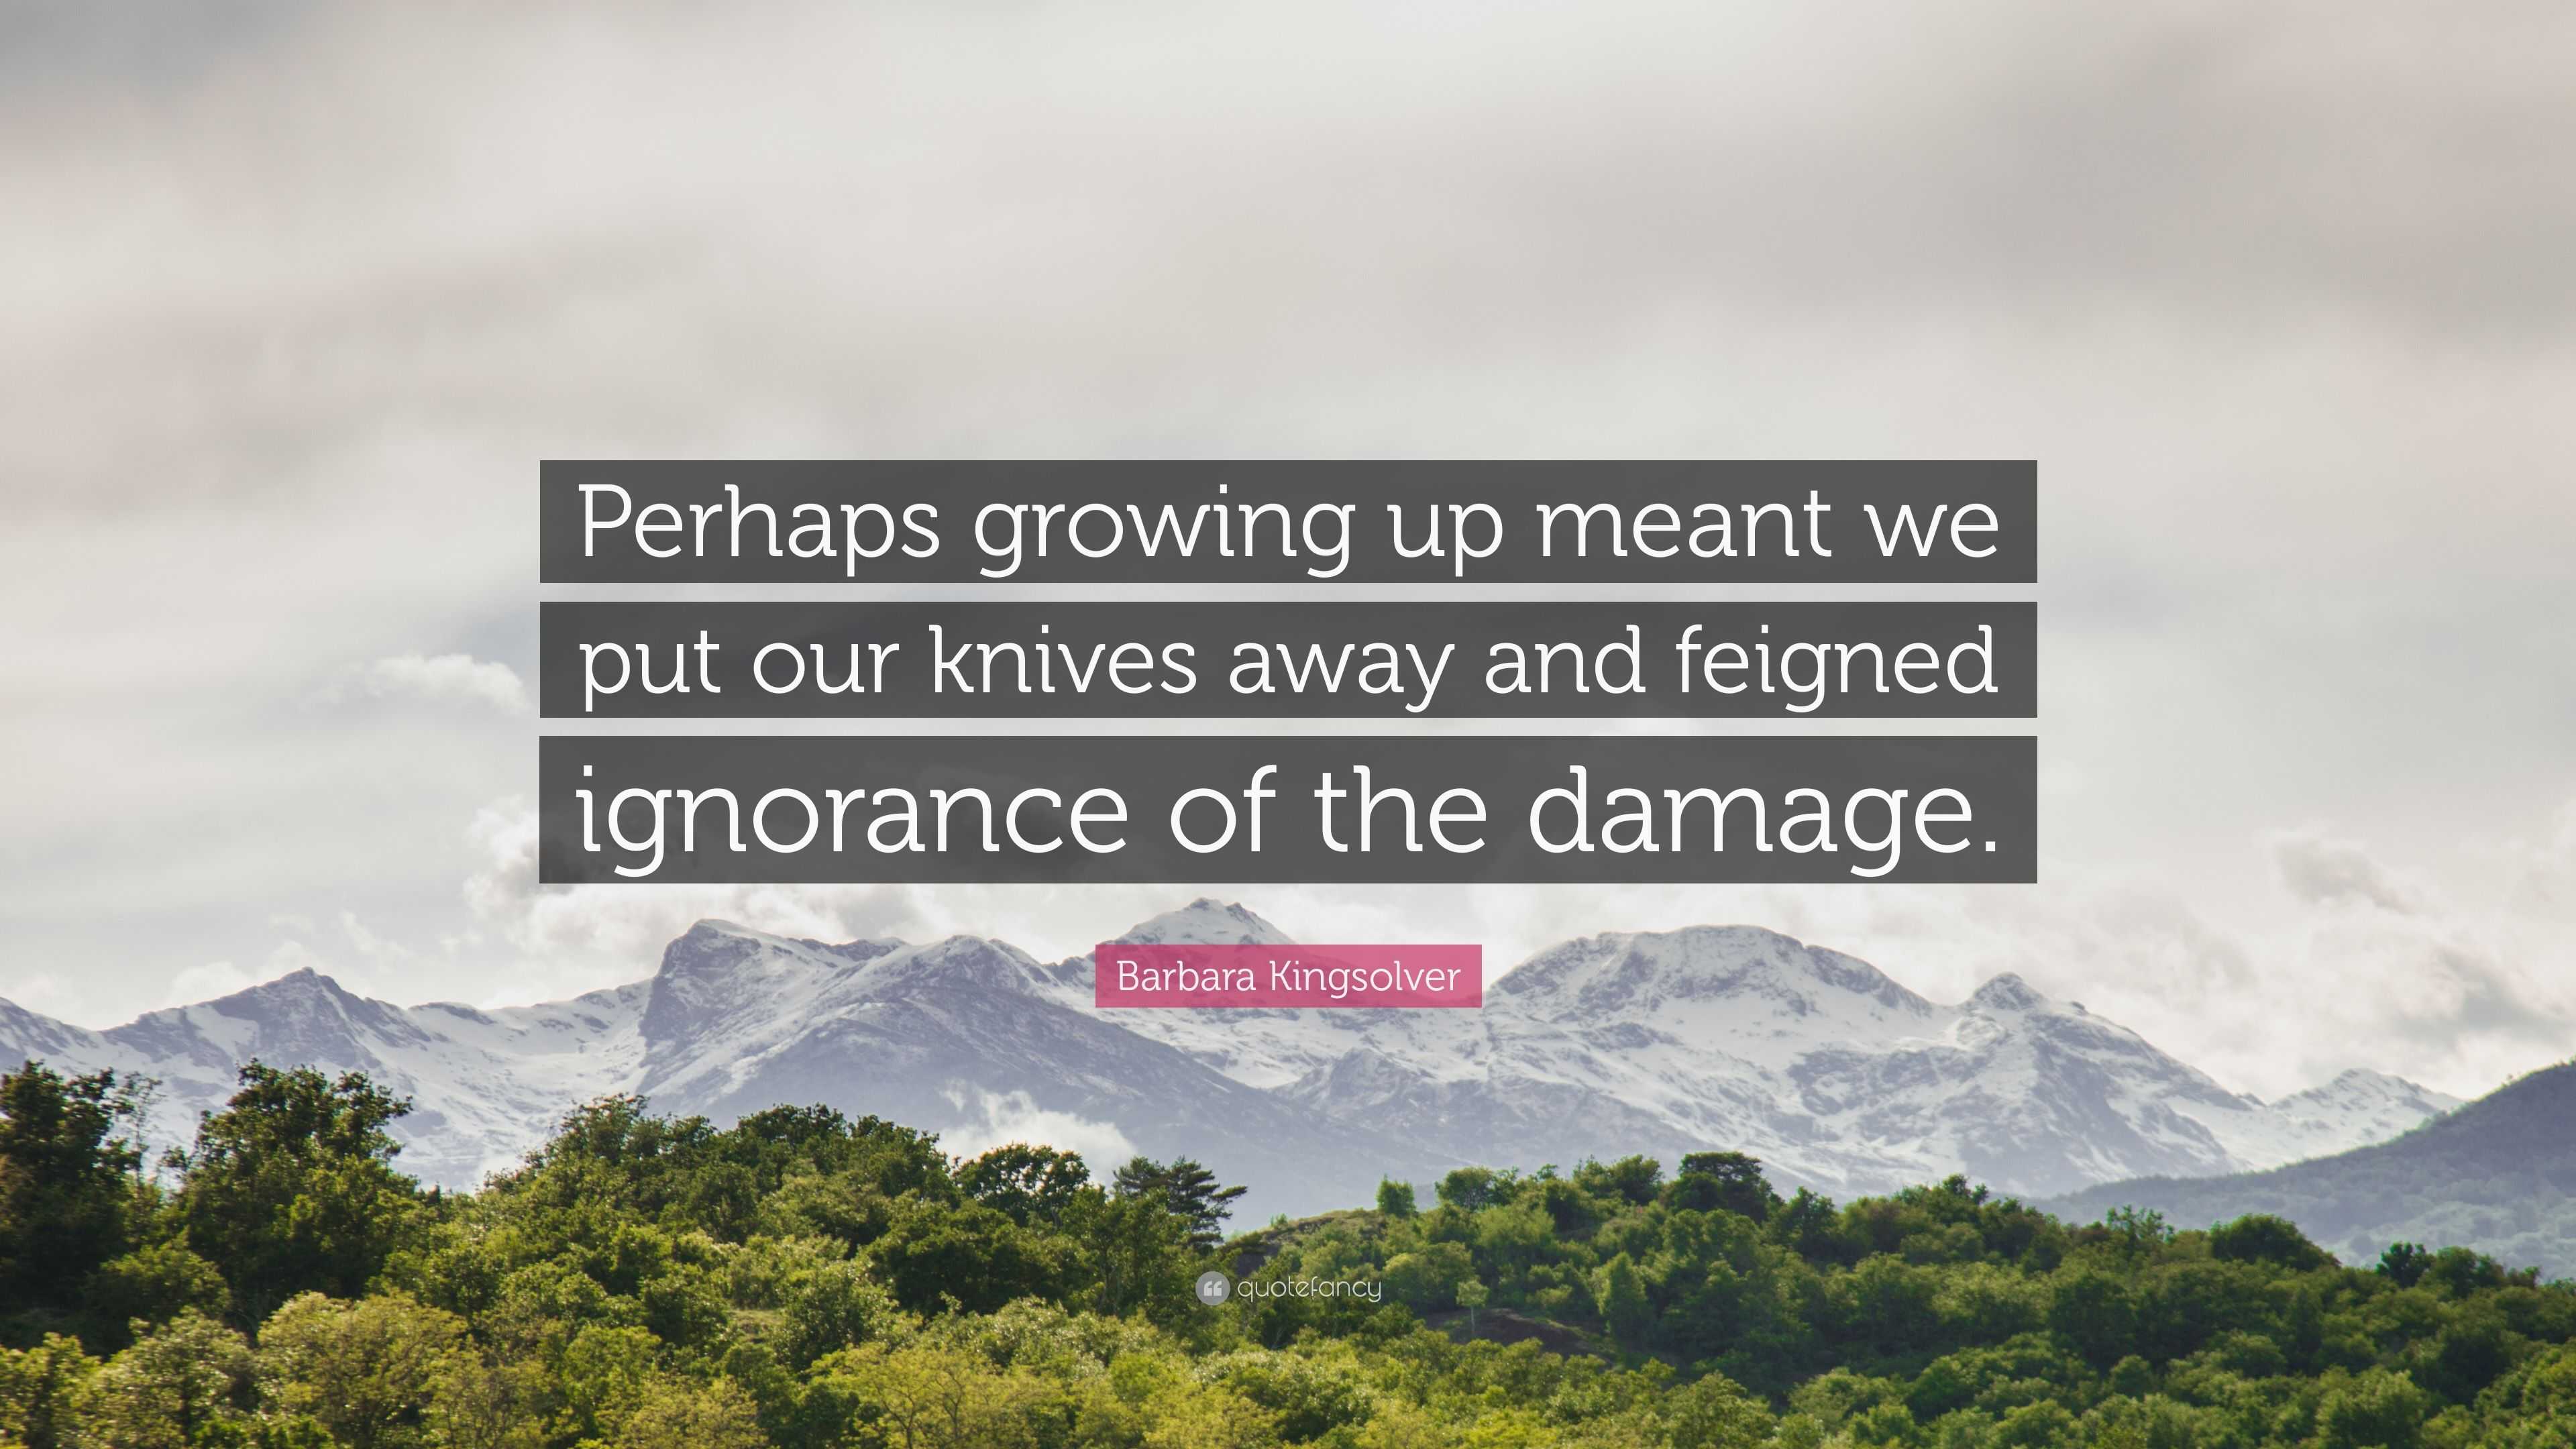 Barbara Kingsolver Quote: “Perhaps growing up meant we put our knives away  and feigned ignorance of